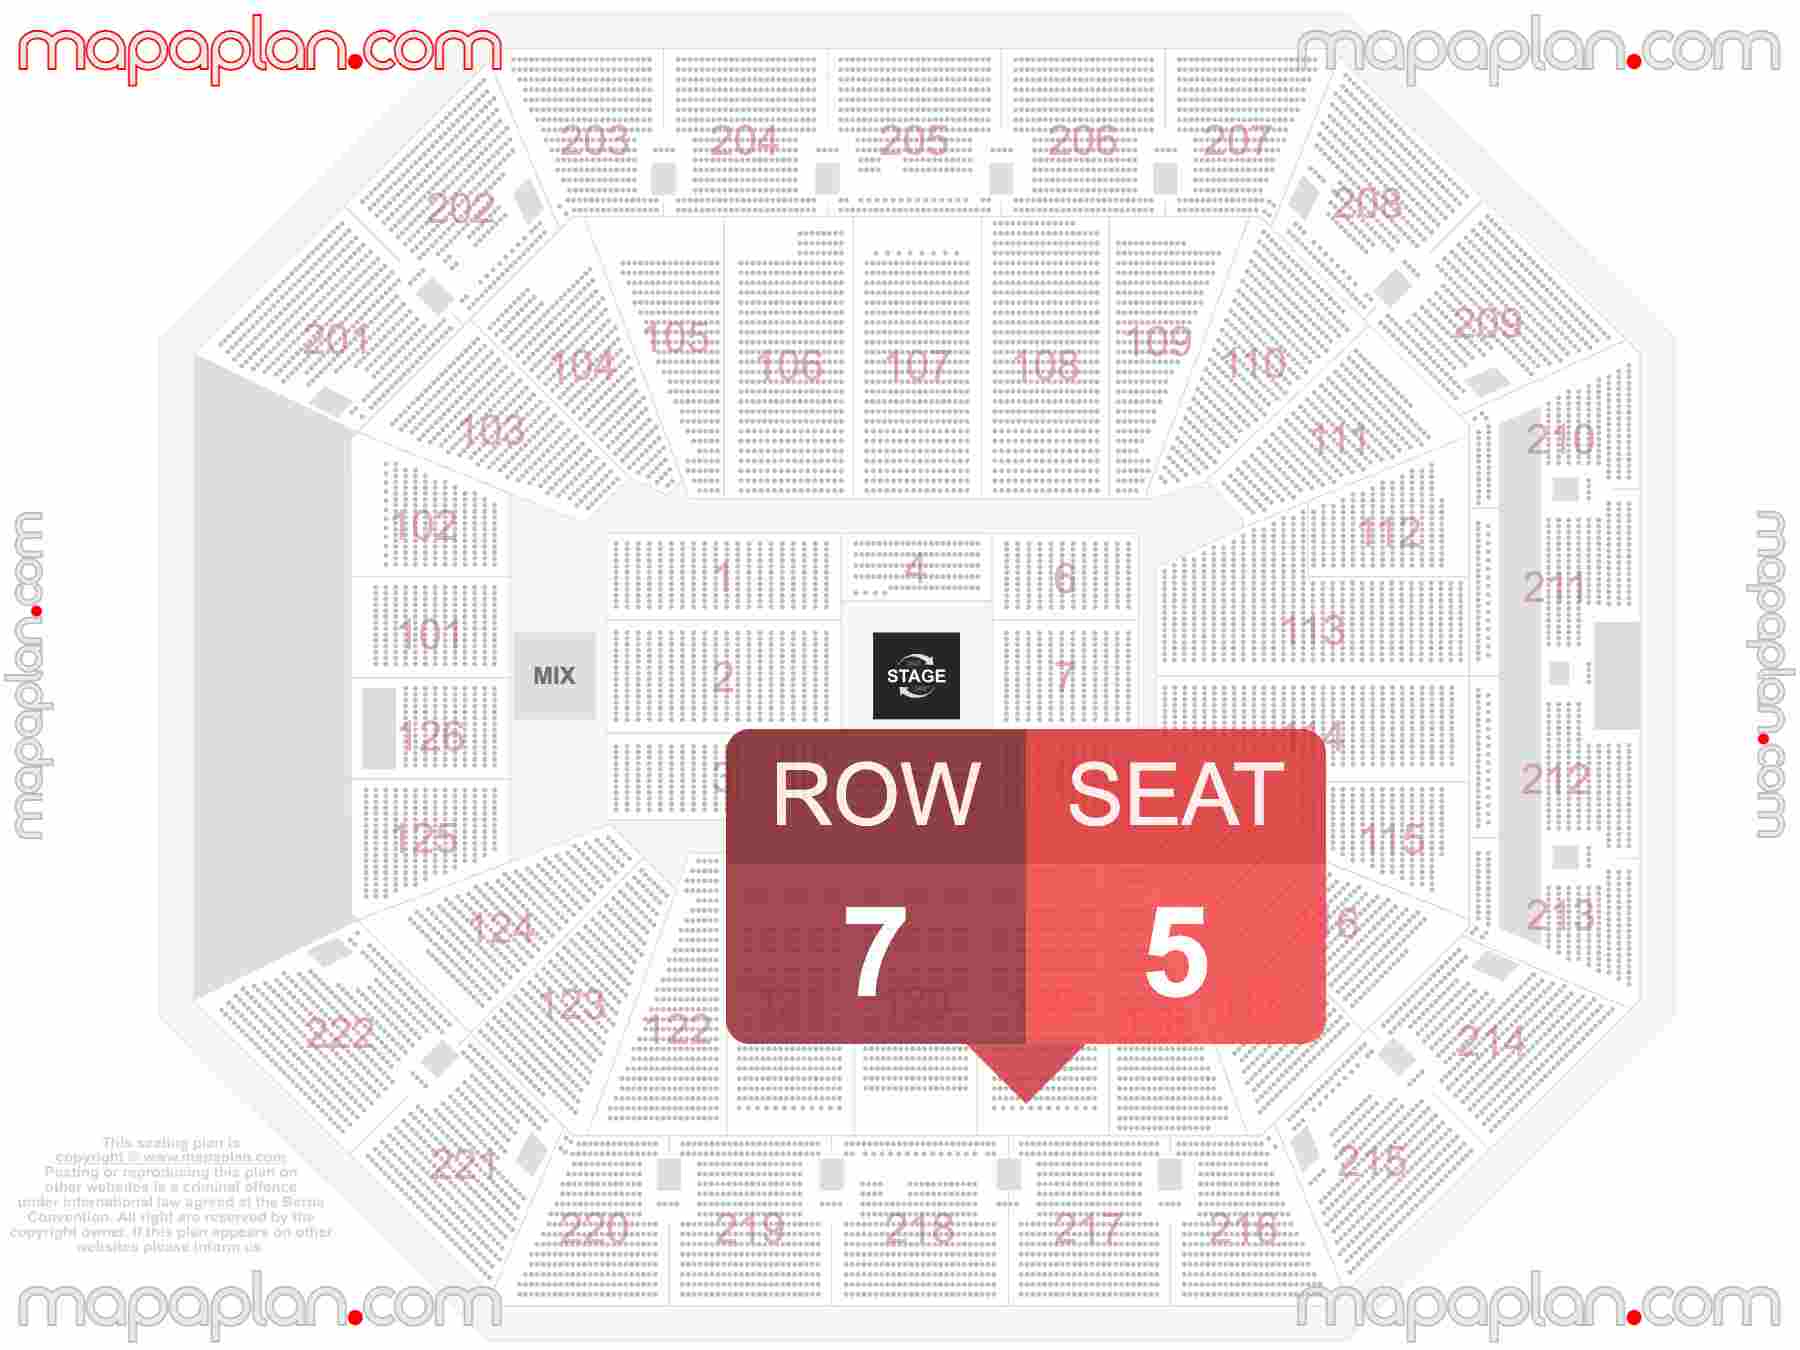 Sacramento Golden 1 Center seating chart In the round concert 360 stage seating chart with exact section numbers showing best rows and seats selection 3d layout - Best interactive seat finder tool with precise detailed location data